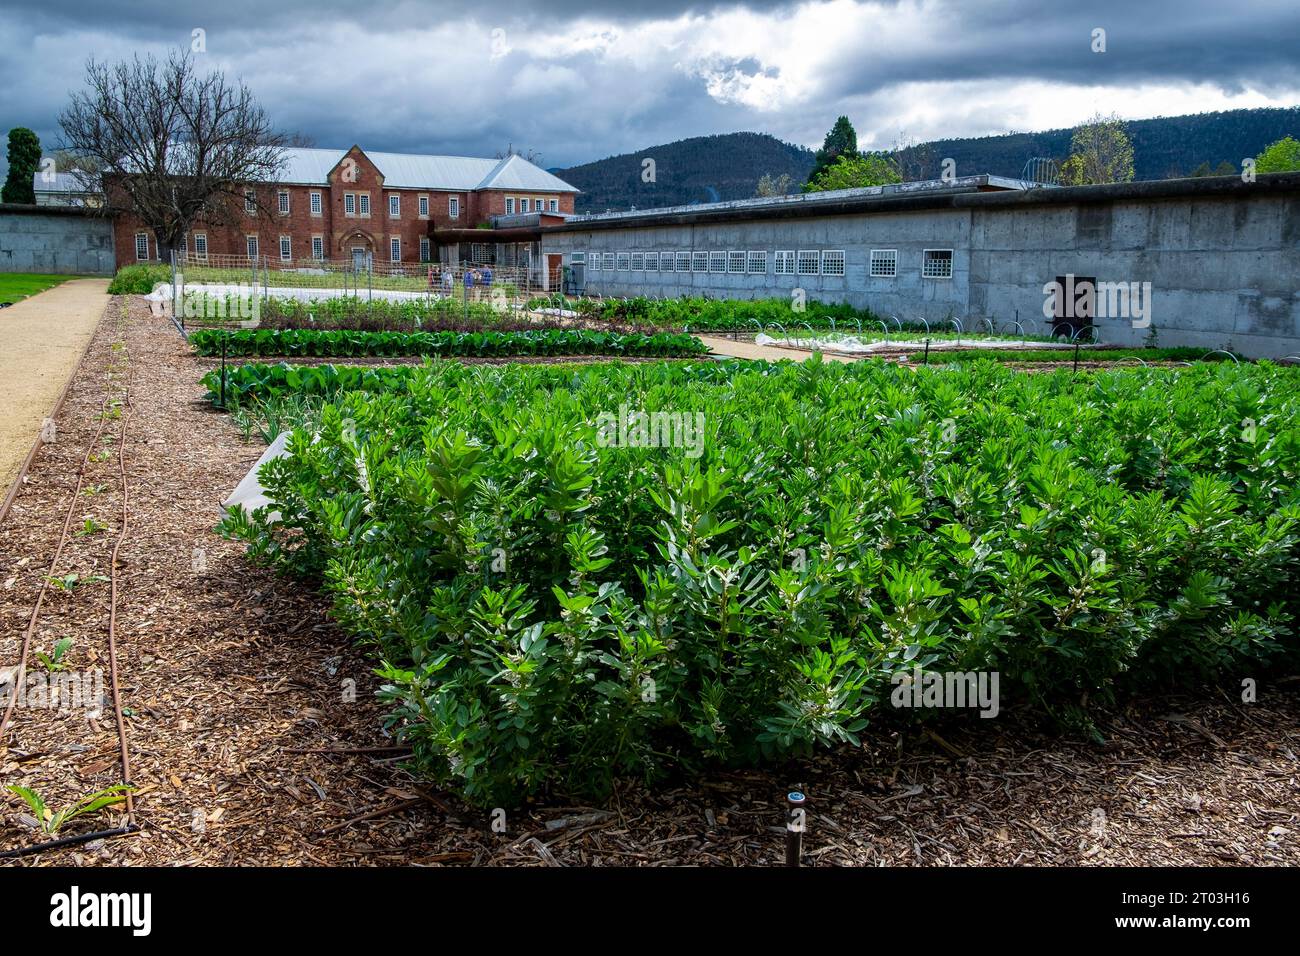 The well-ordered walled kitchen garden at Agrarian Kitchen, in the grounds of the former historic old mental asylum at New Norfolk in the Derwent Valley, Tasmania Stock Photo